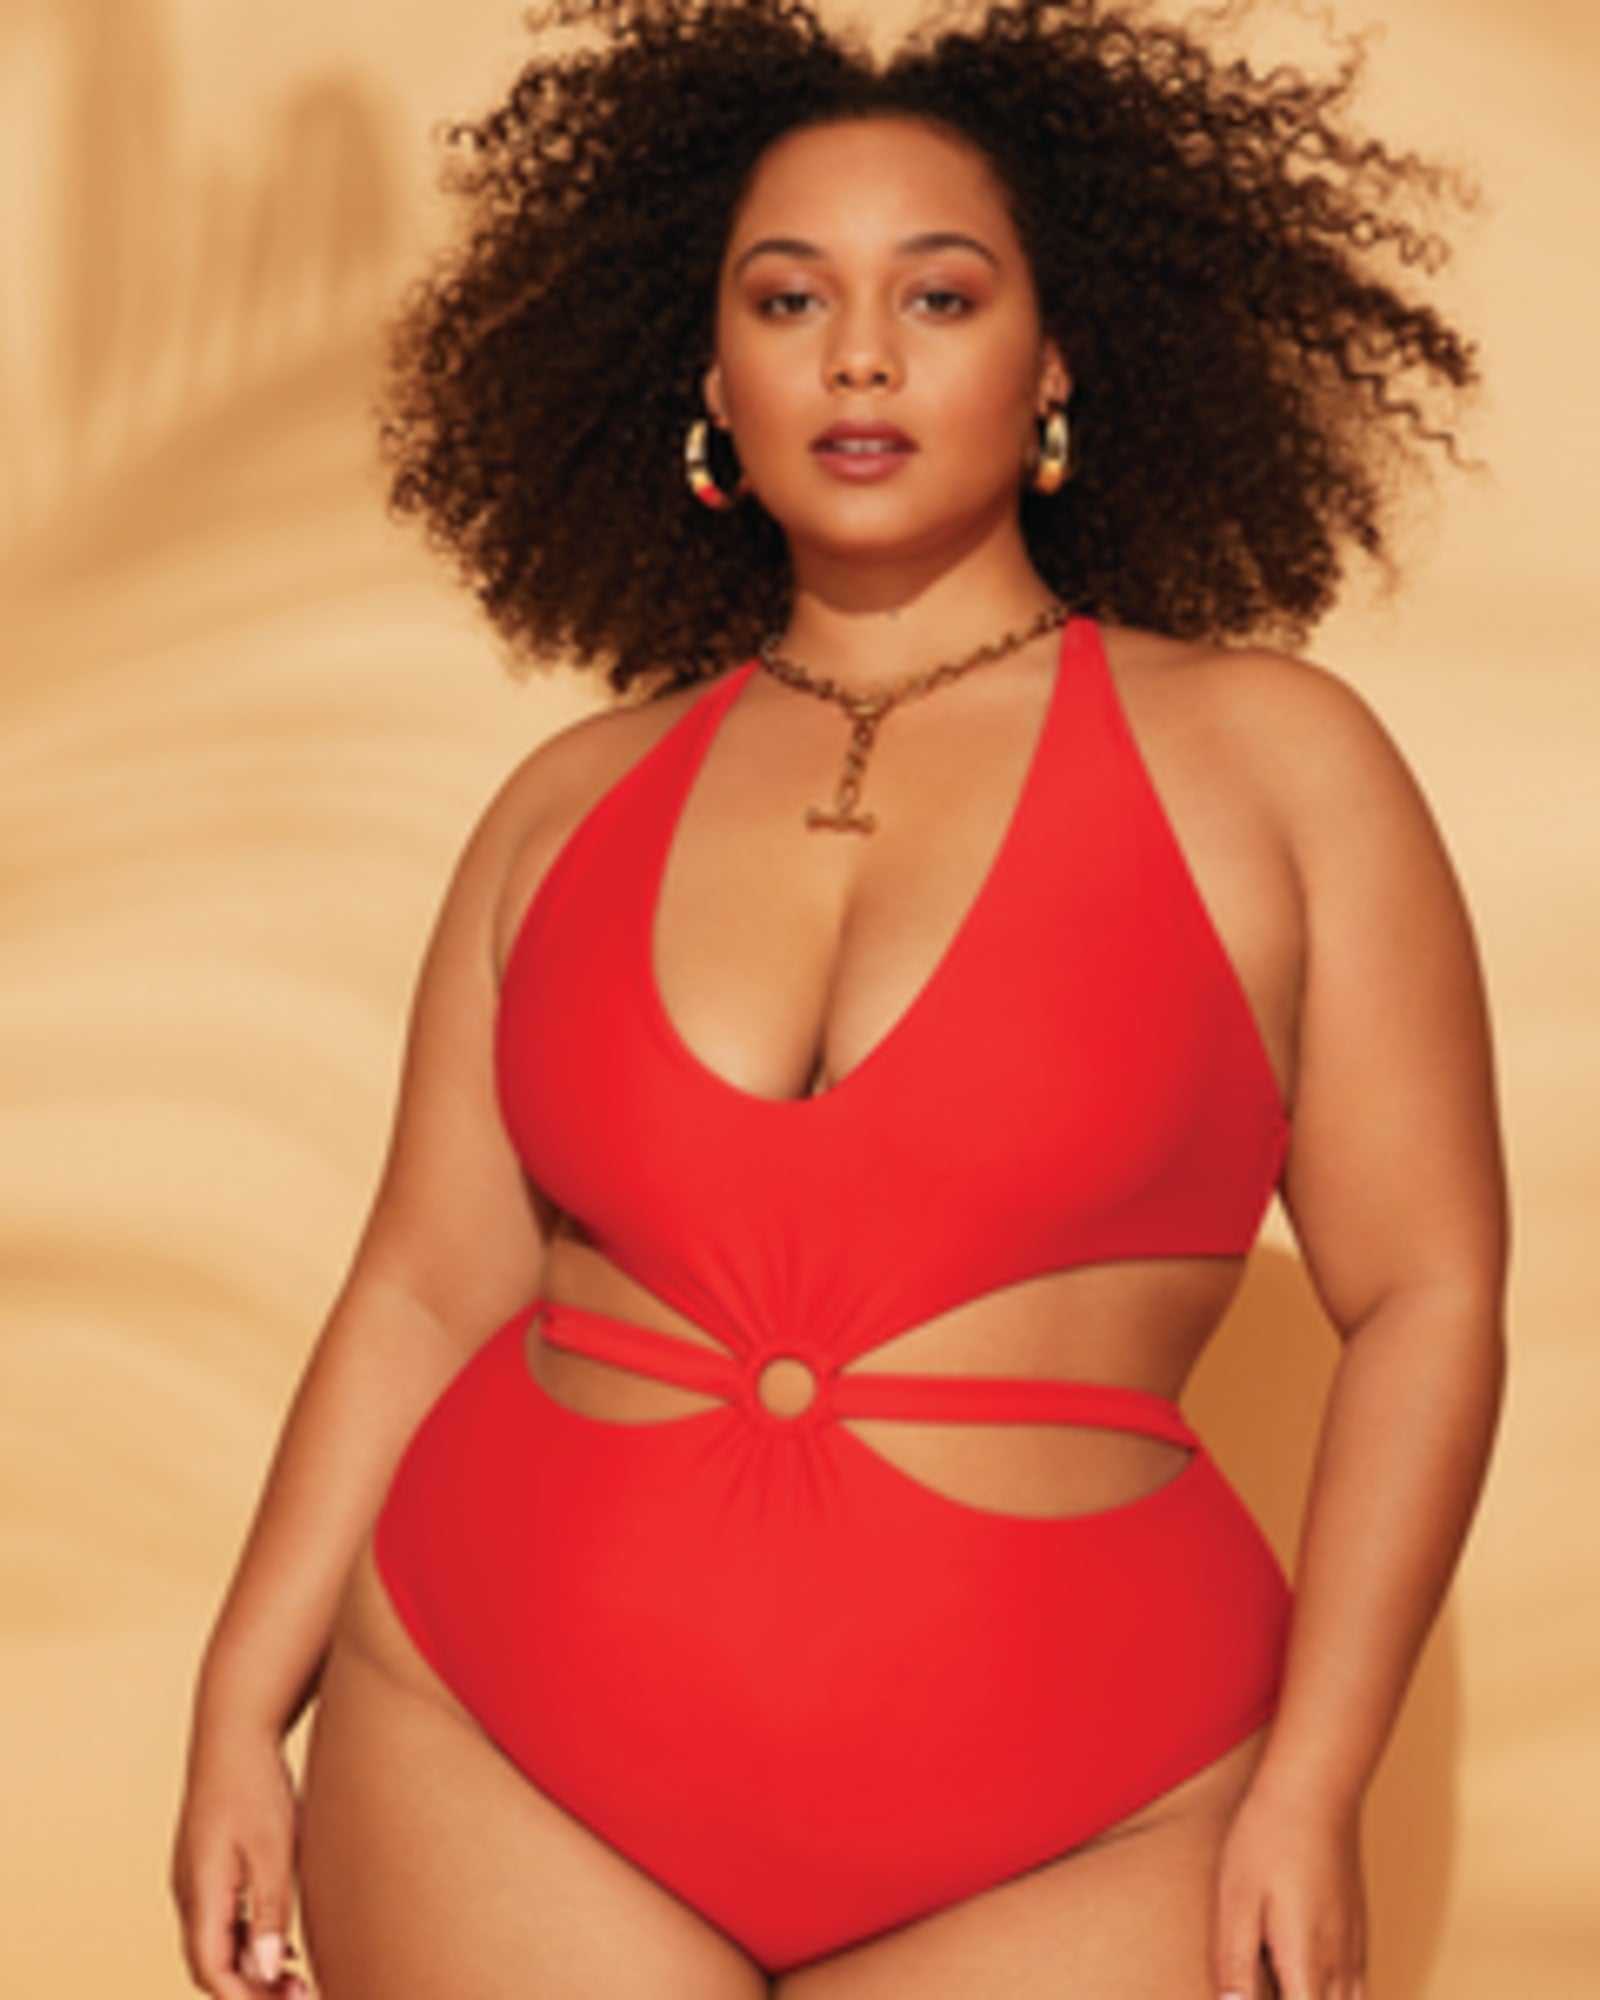 18 OF THE BEST RED PLUS SIZE SWIMSUITS - dimplesonmywhat